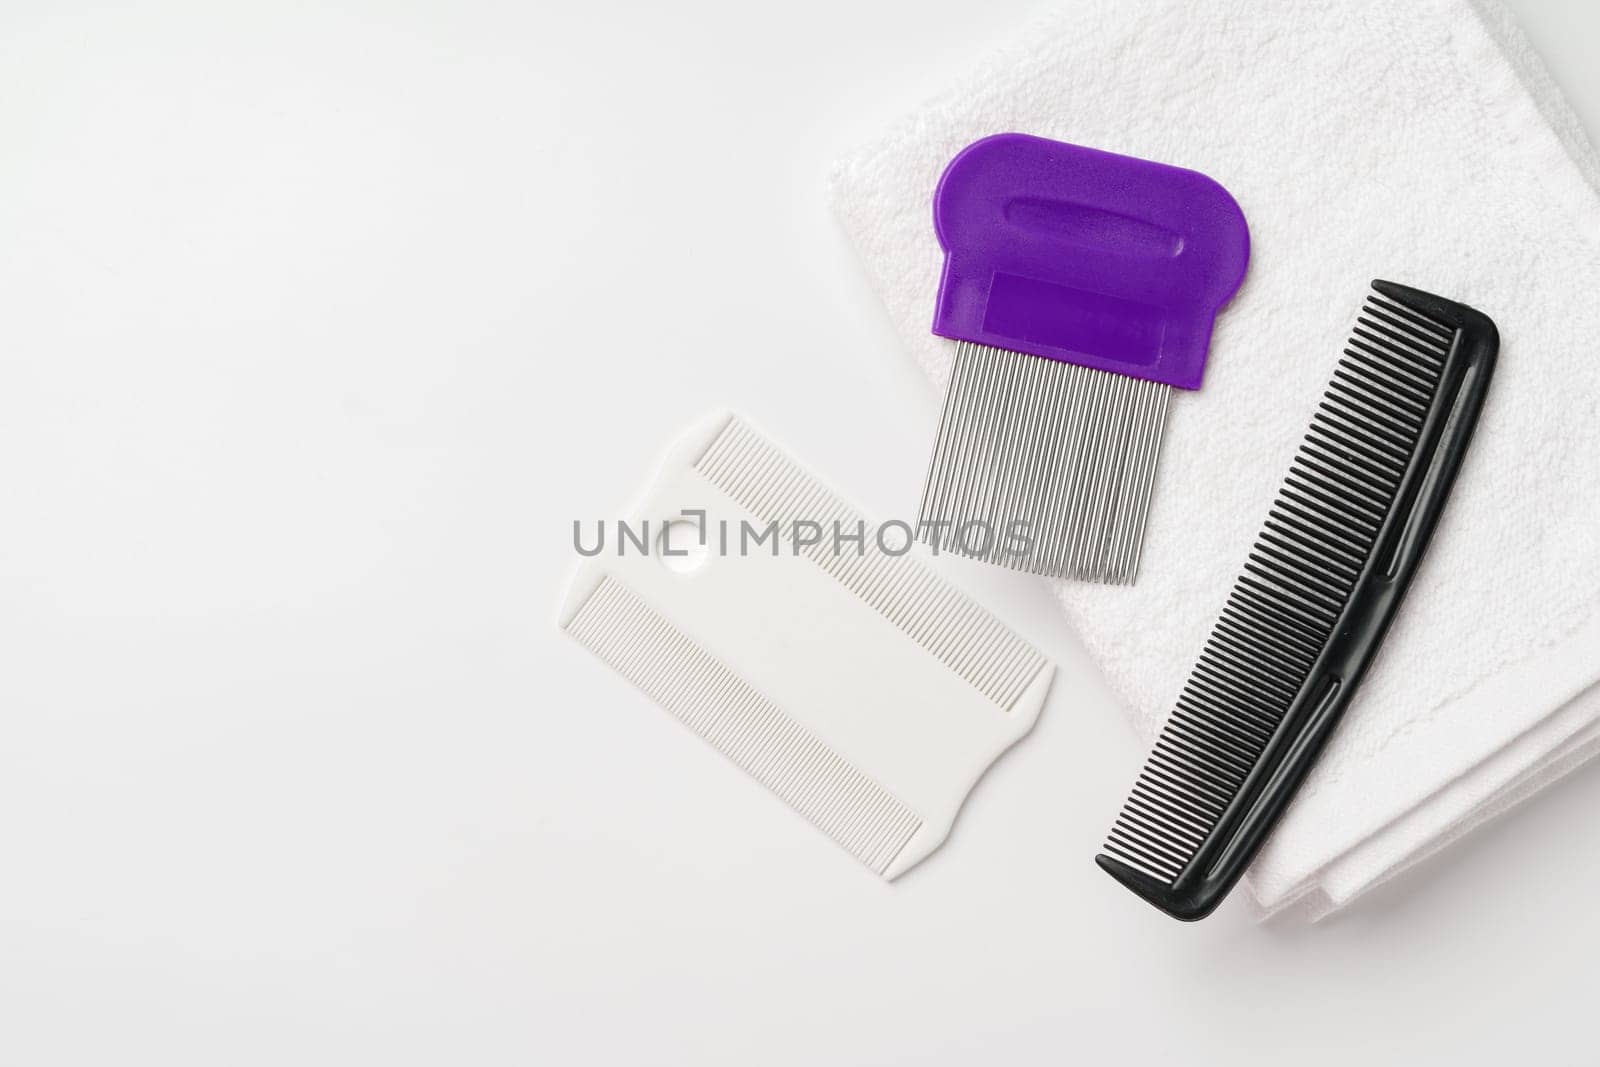 Anti lice combs and towel on white background by Fabrikasimf